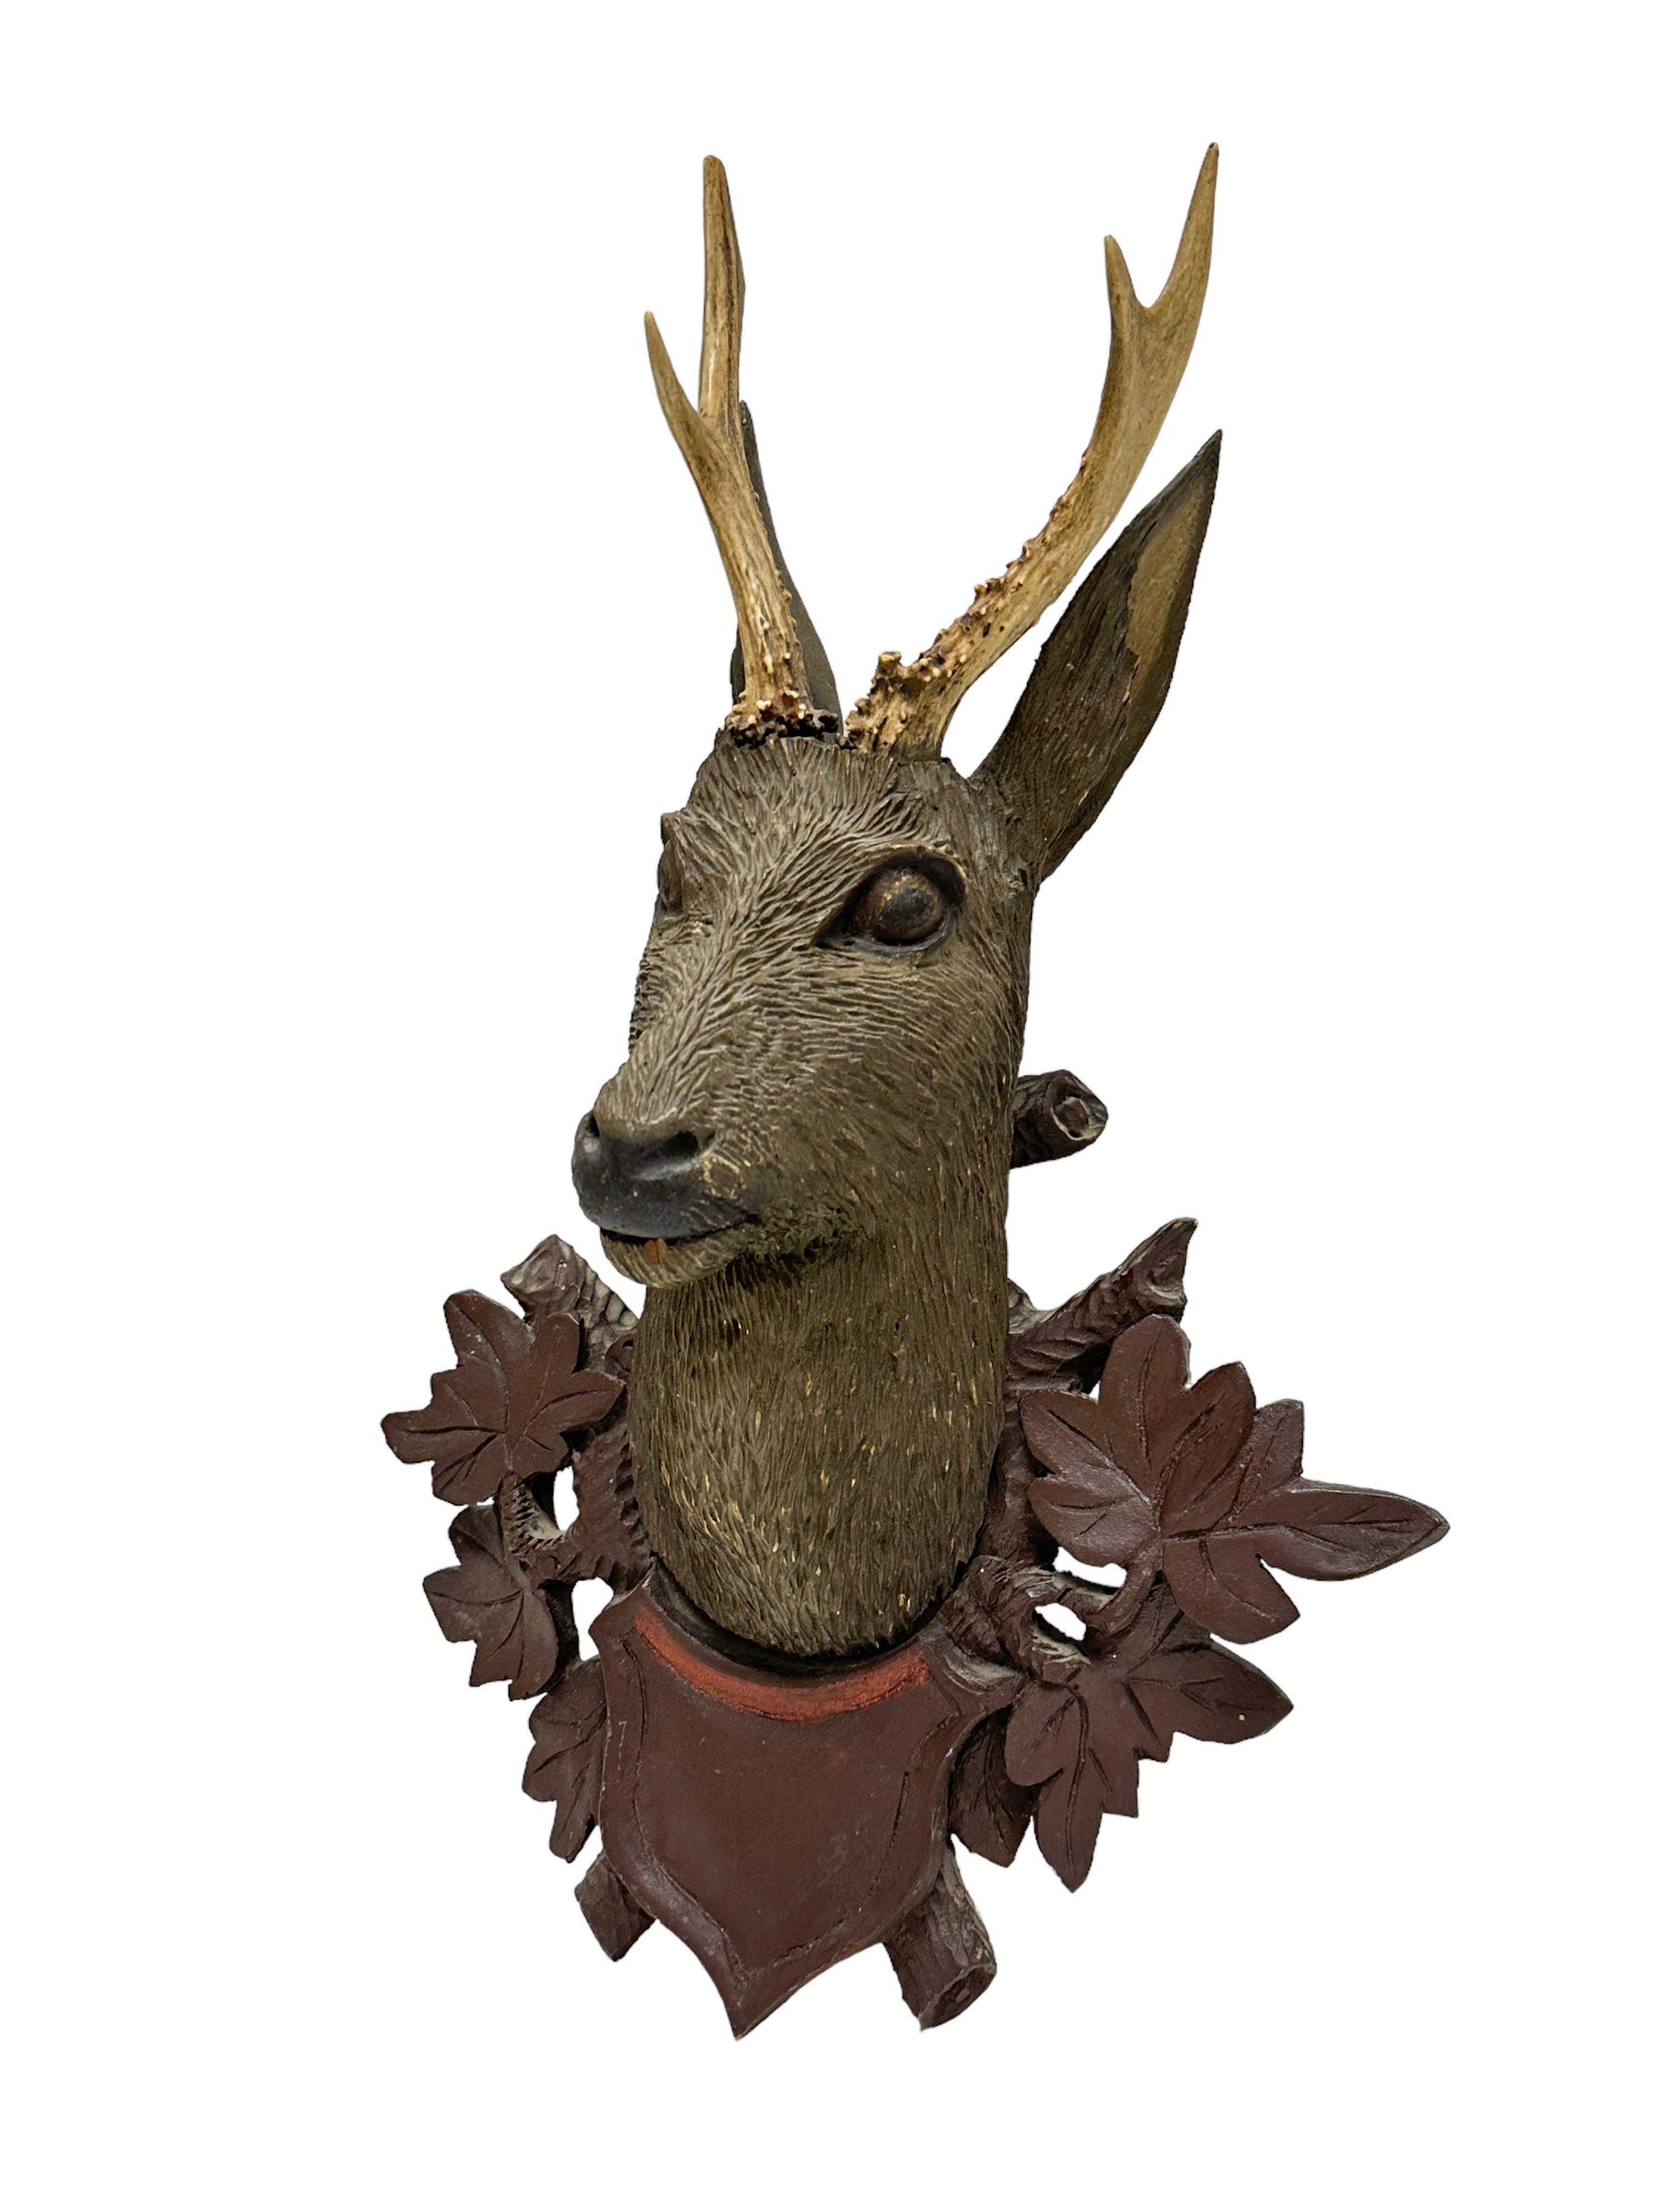 Hand-Carved Beautiful Folk Art Wood Carved Deer Head with Real Antlers, Germany 19th Century